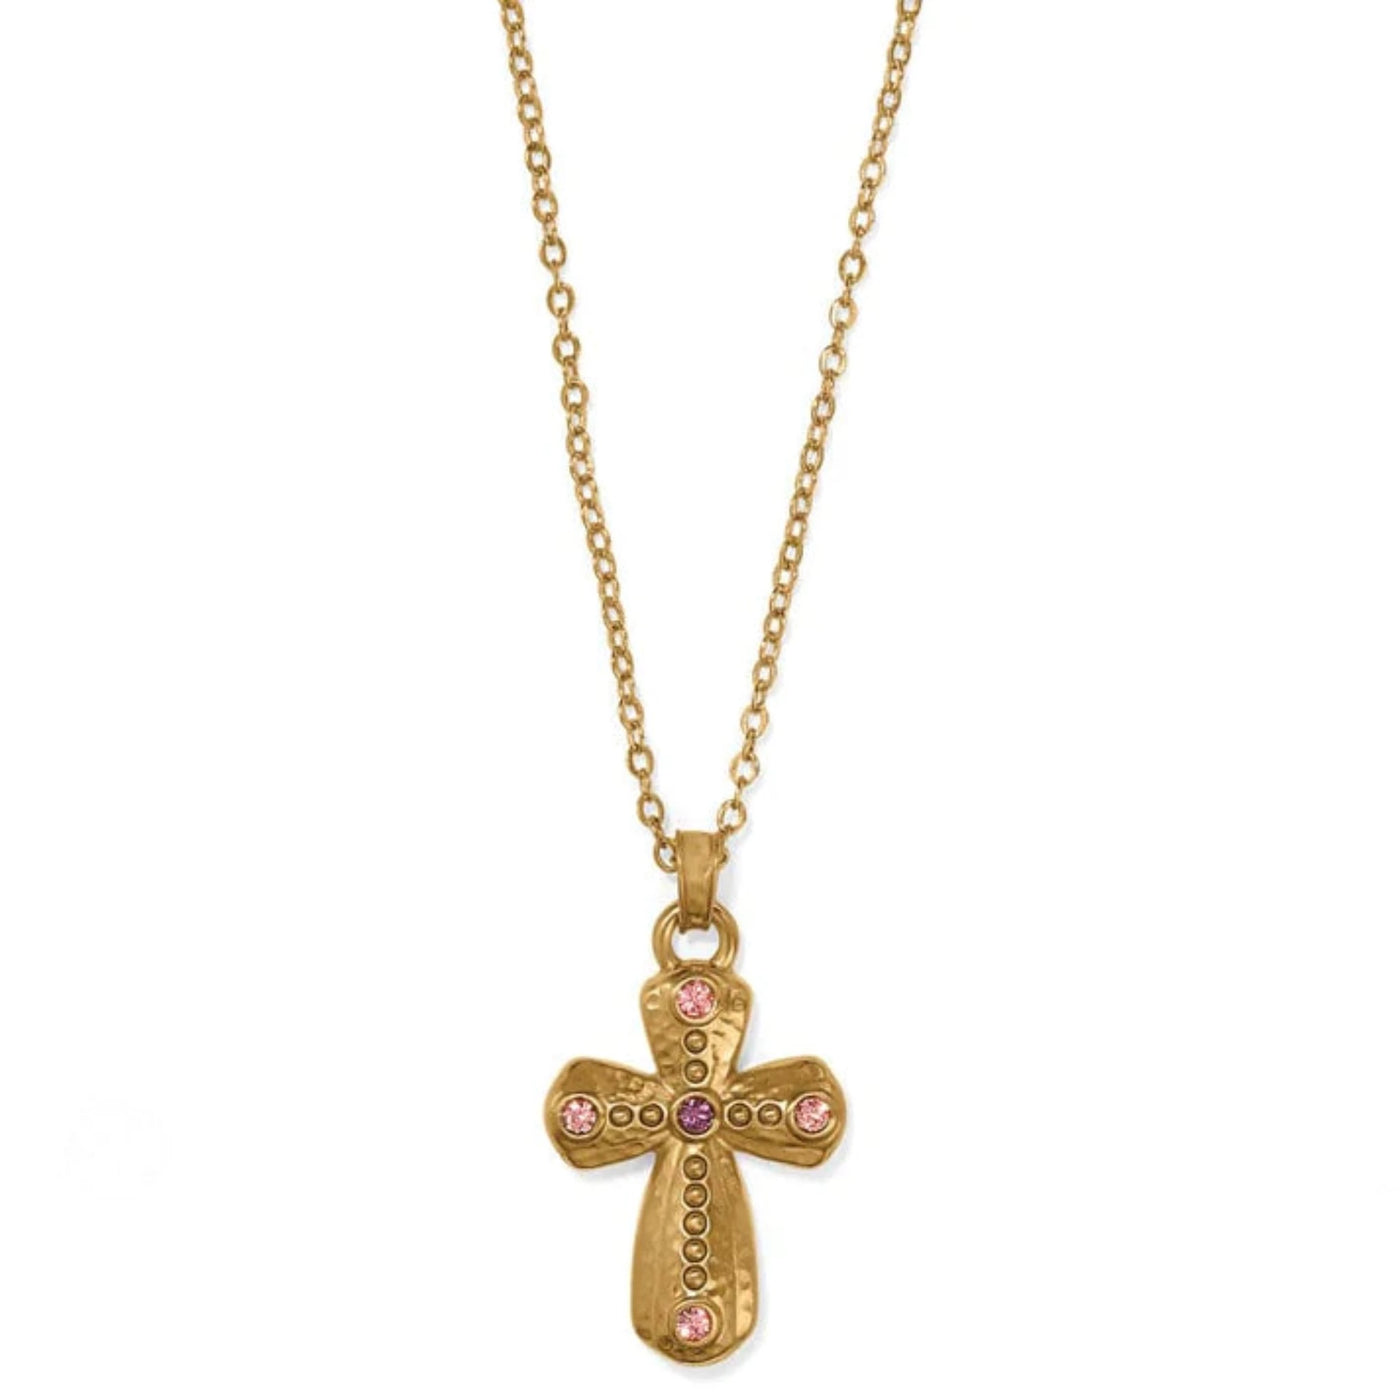 Brighton - Majestic Imperial Cross Reversible Necklace